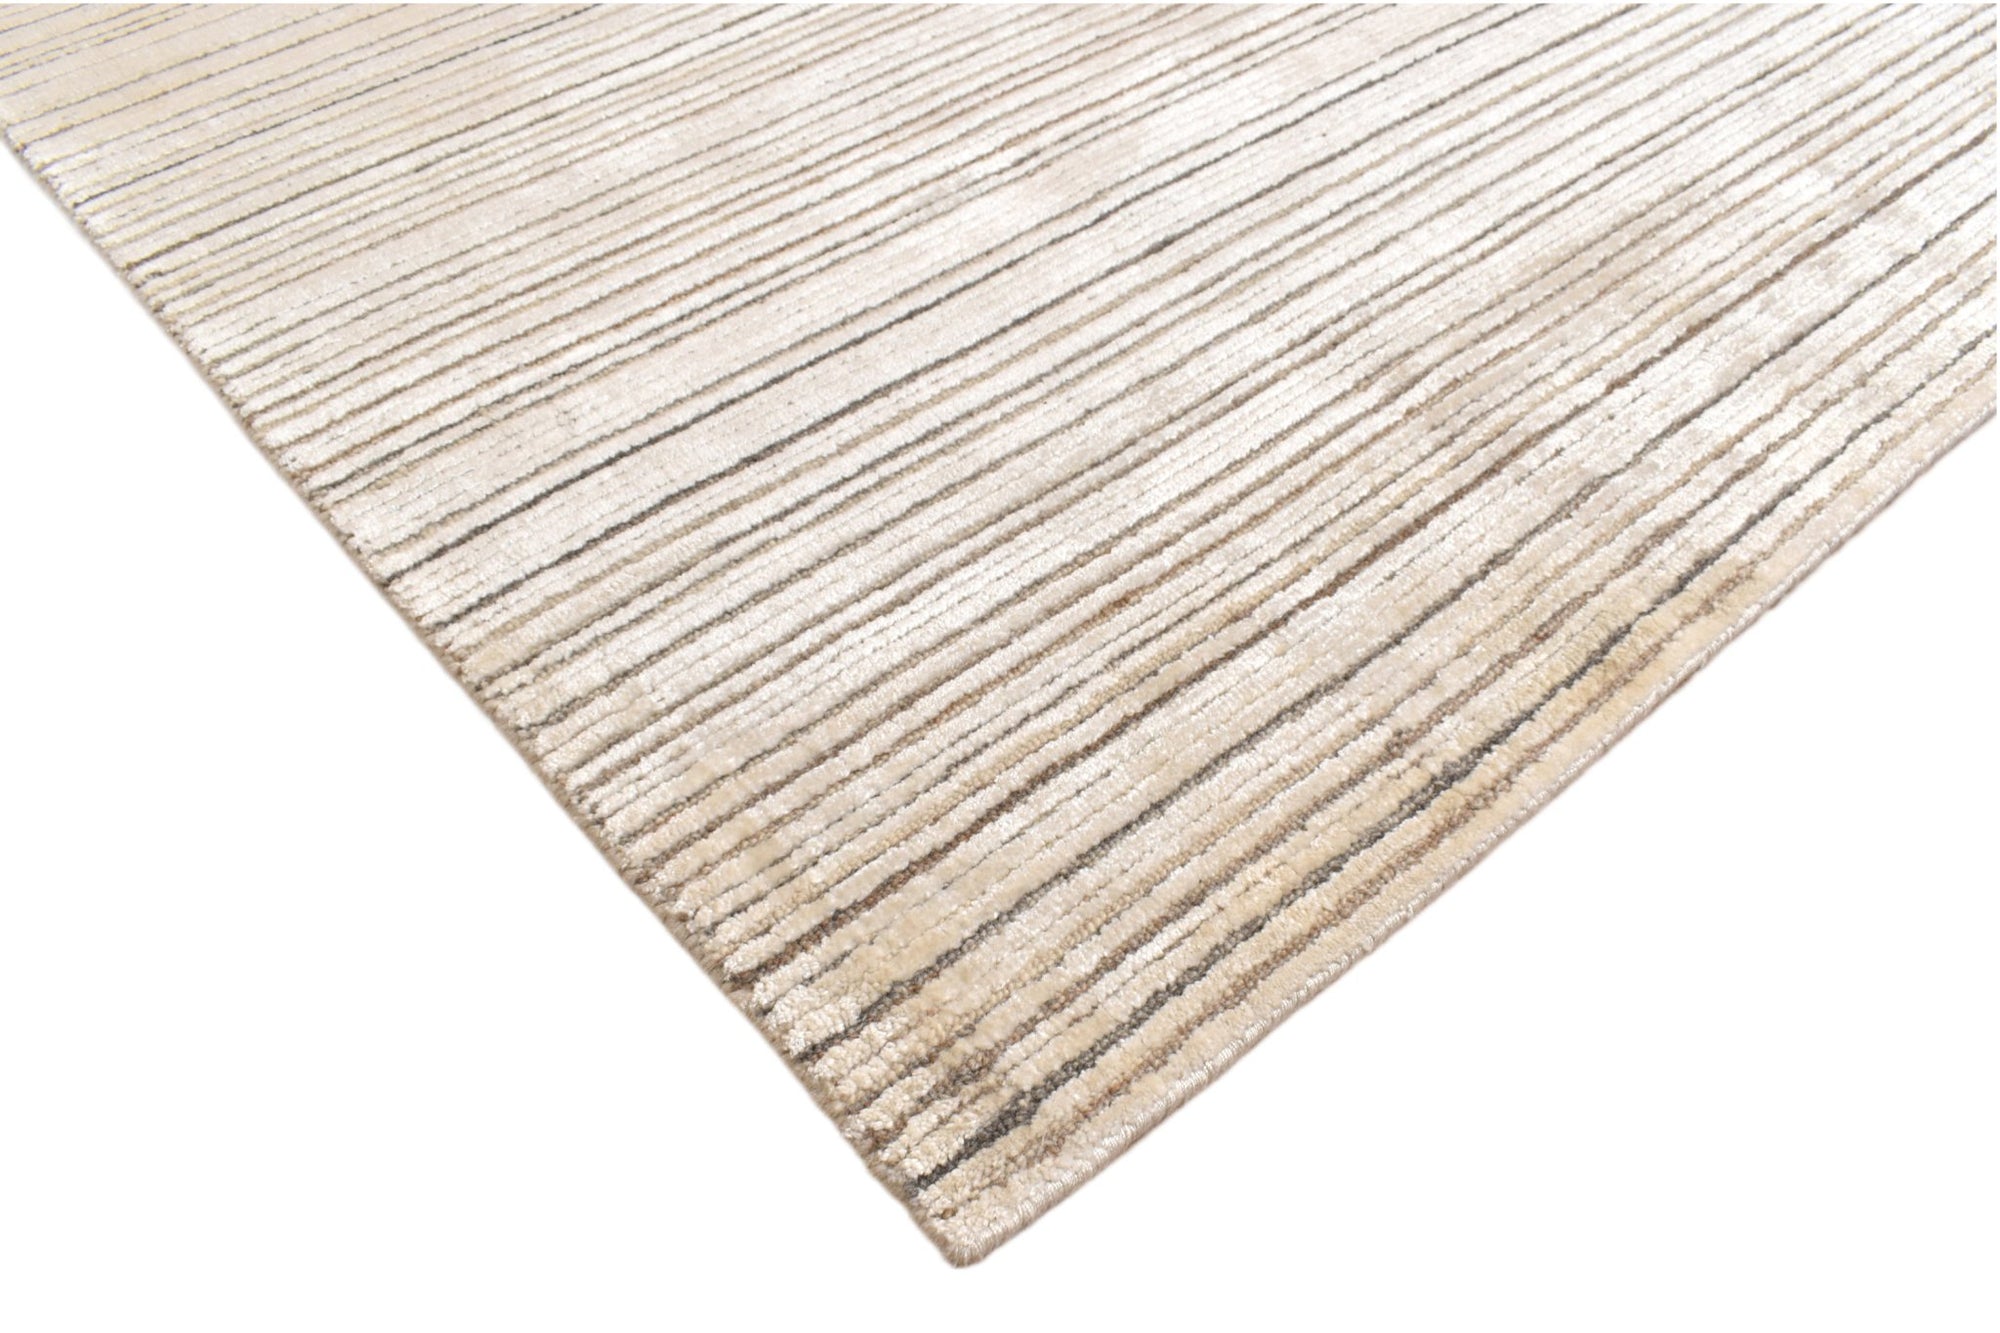 Eccentric Lines 111 Ivory Rug - Baconco